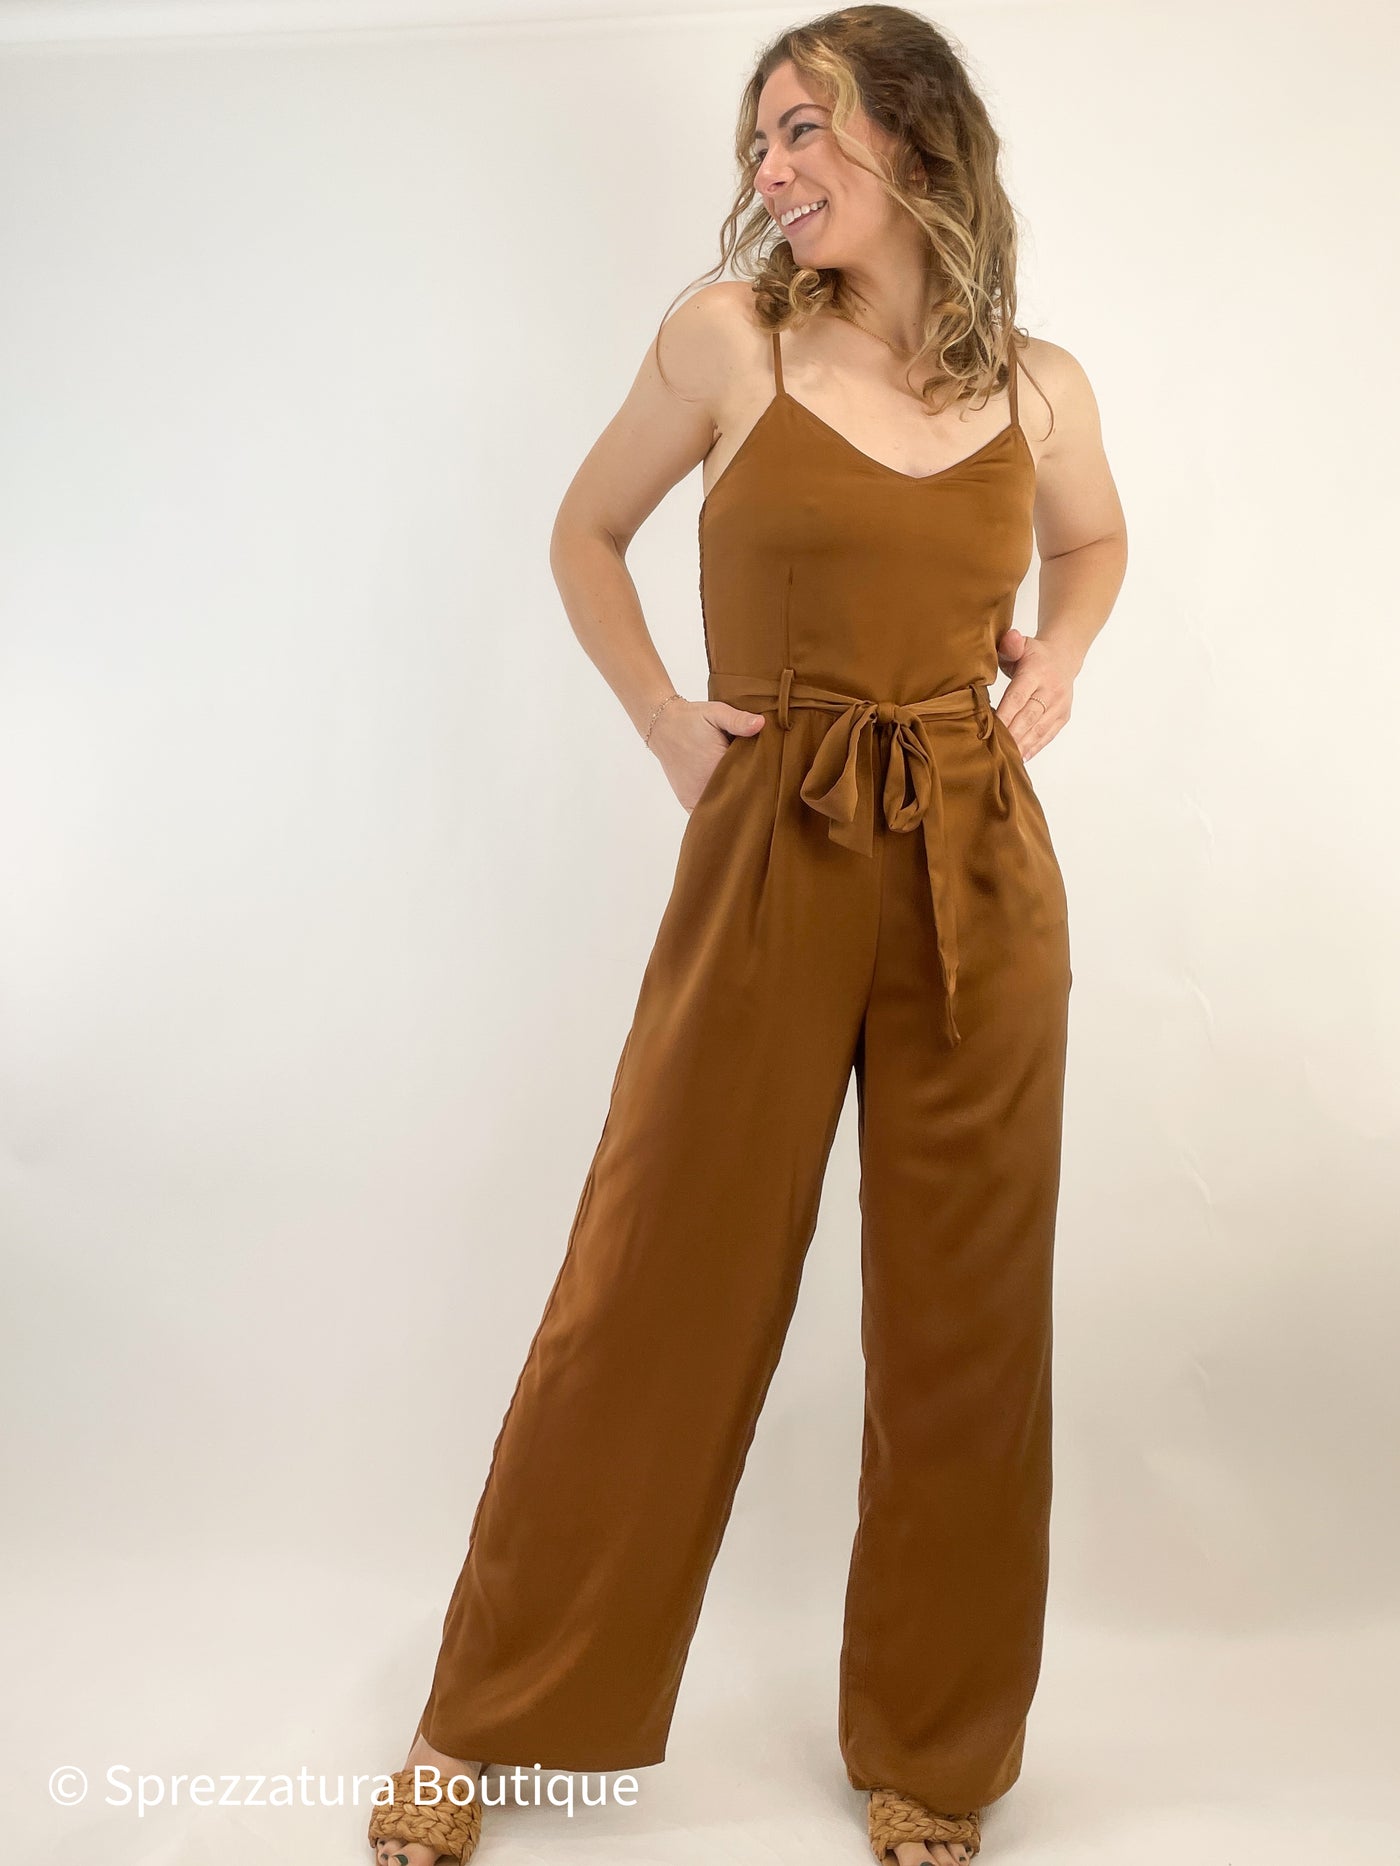 Cognac brown copper satin jumpsuit wide leg tie waist adjustable strap wedding guest holiday party concert special event outfit flattering comfortable Modern smart causal female chic effortless outfit womens ladies gift elegant effortless clothing everyday stylish clothes apparel outfits chic winter fall autumn professional style women’s boutique trendy teacher office cute outfit boutique clothes fashion quality work from home neutral wardrobe essential basics lounge athleisure gift for her 